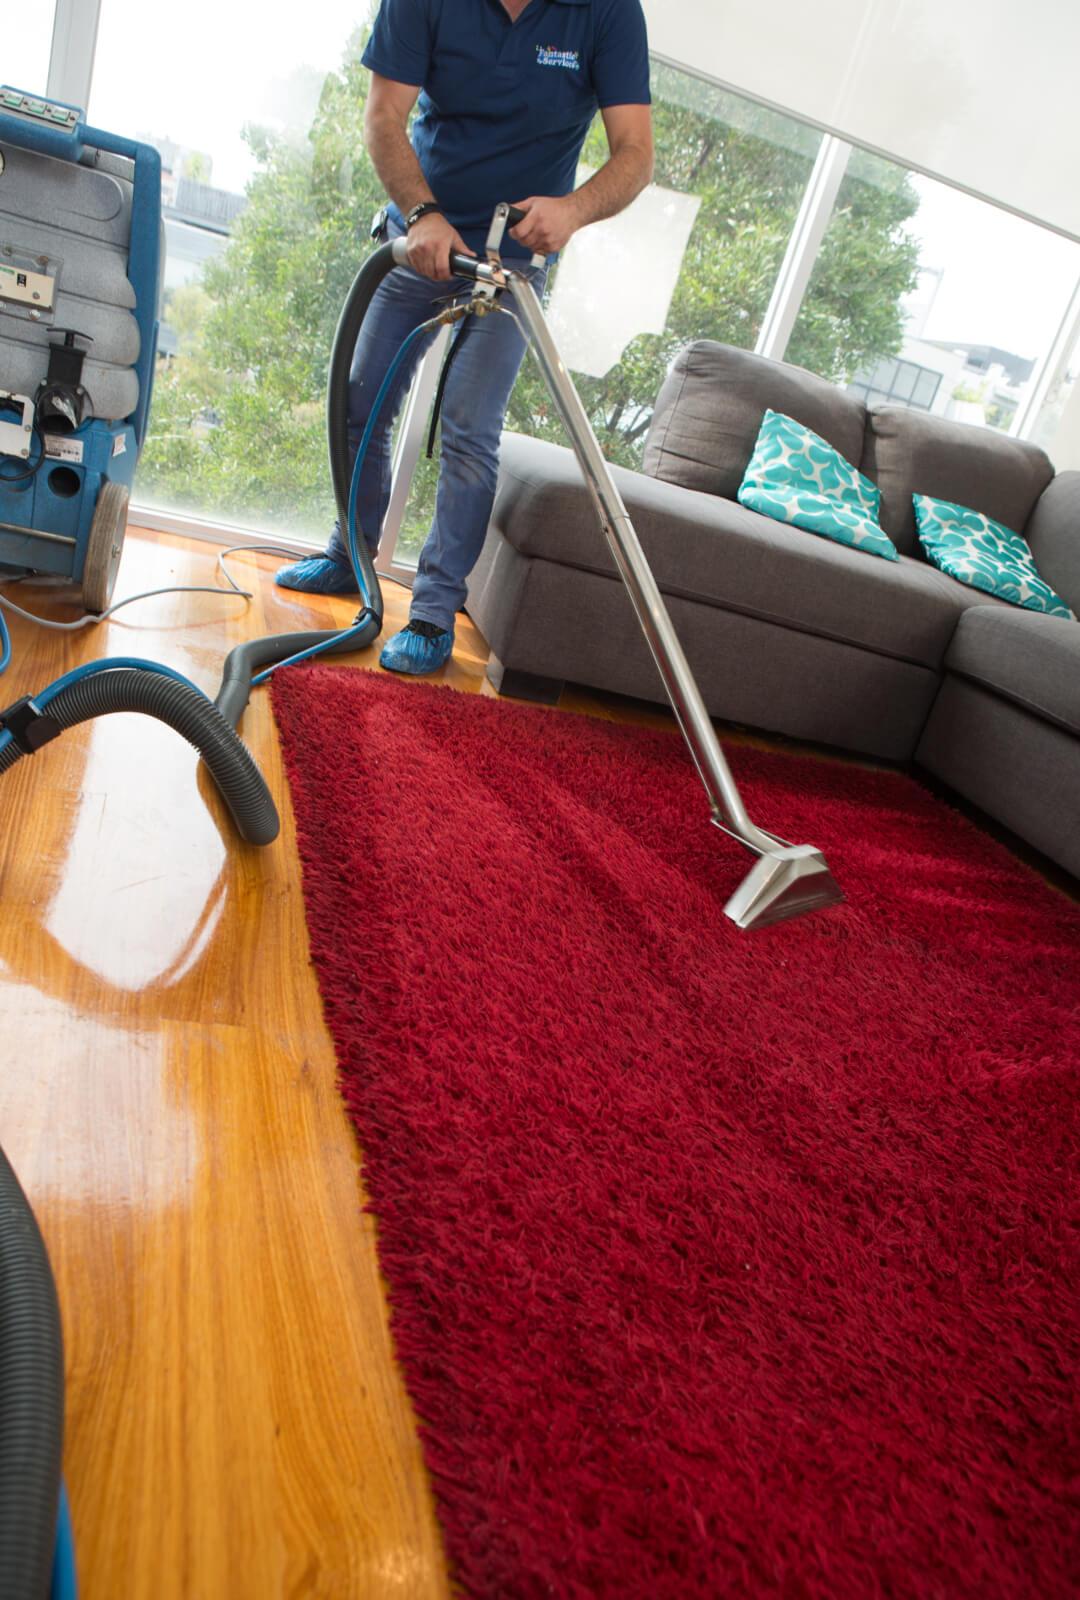 Professional Carpet Cleaning service performed by carpet cleaning professional